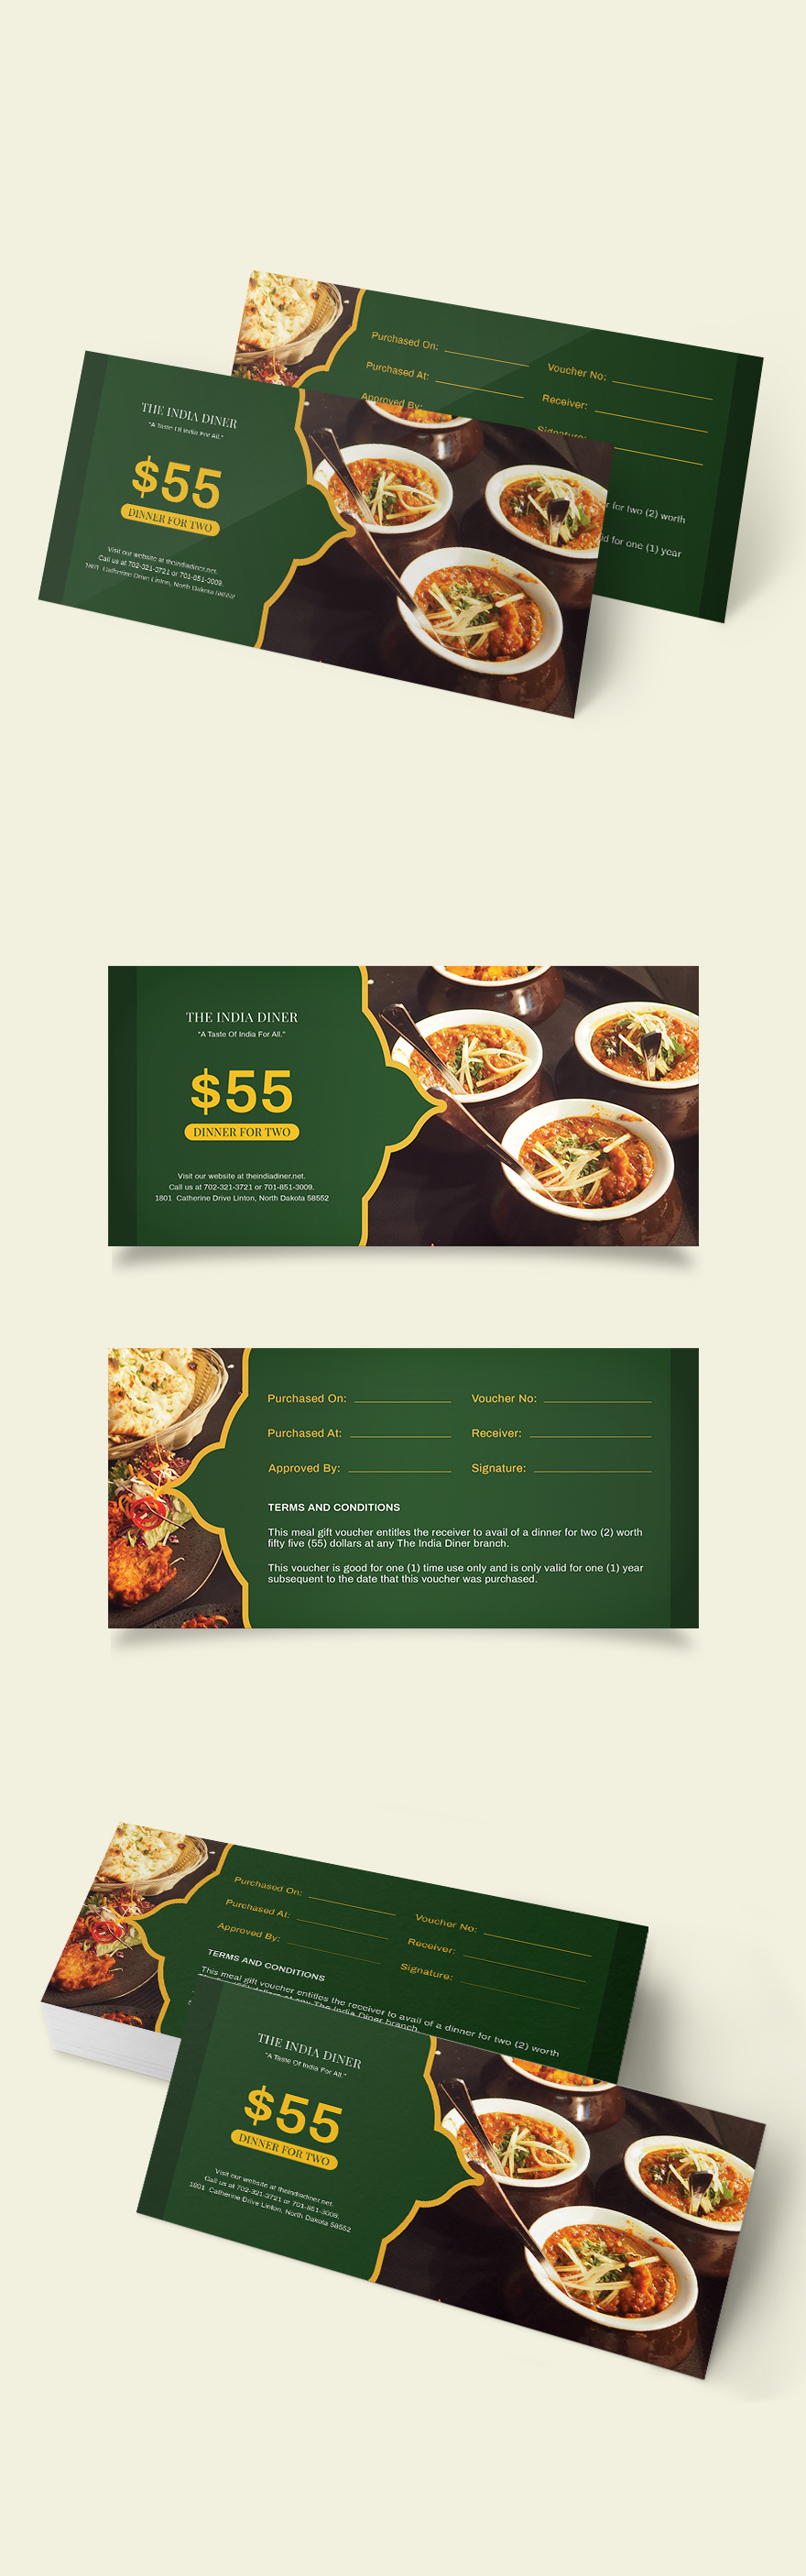 12-free-meal-voucher-templates-customize-download-template